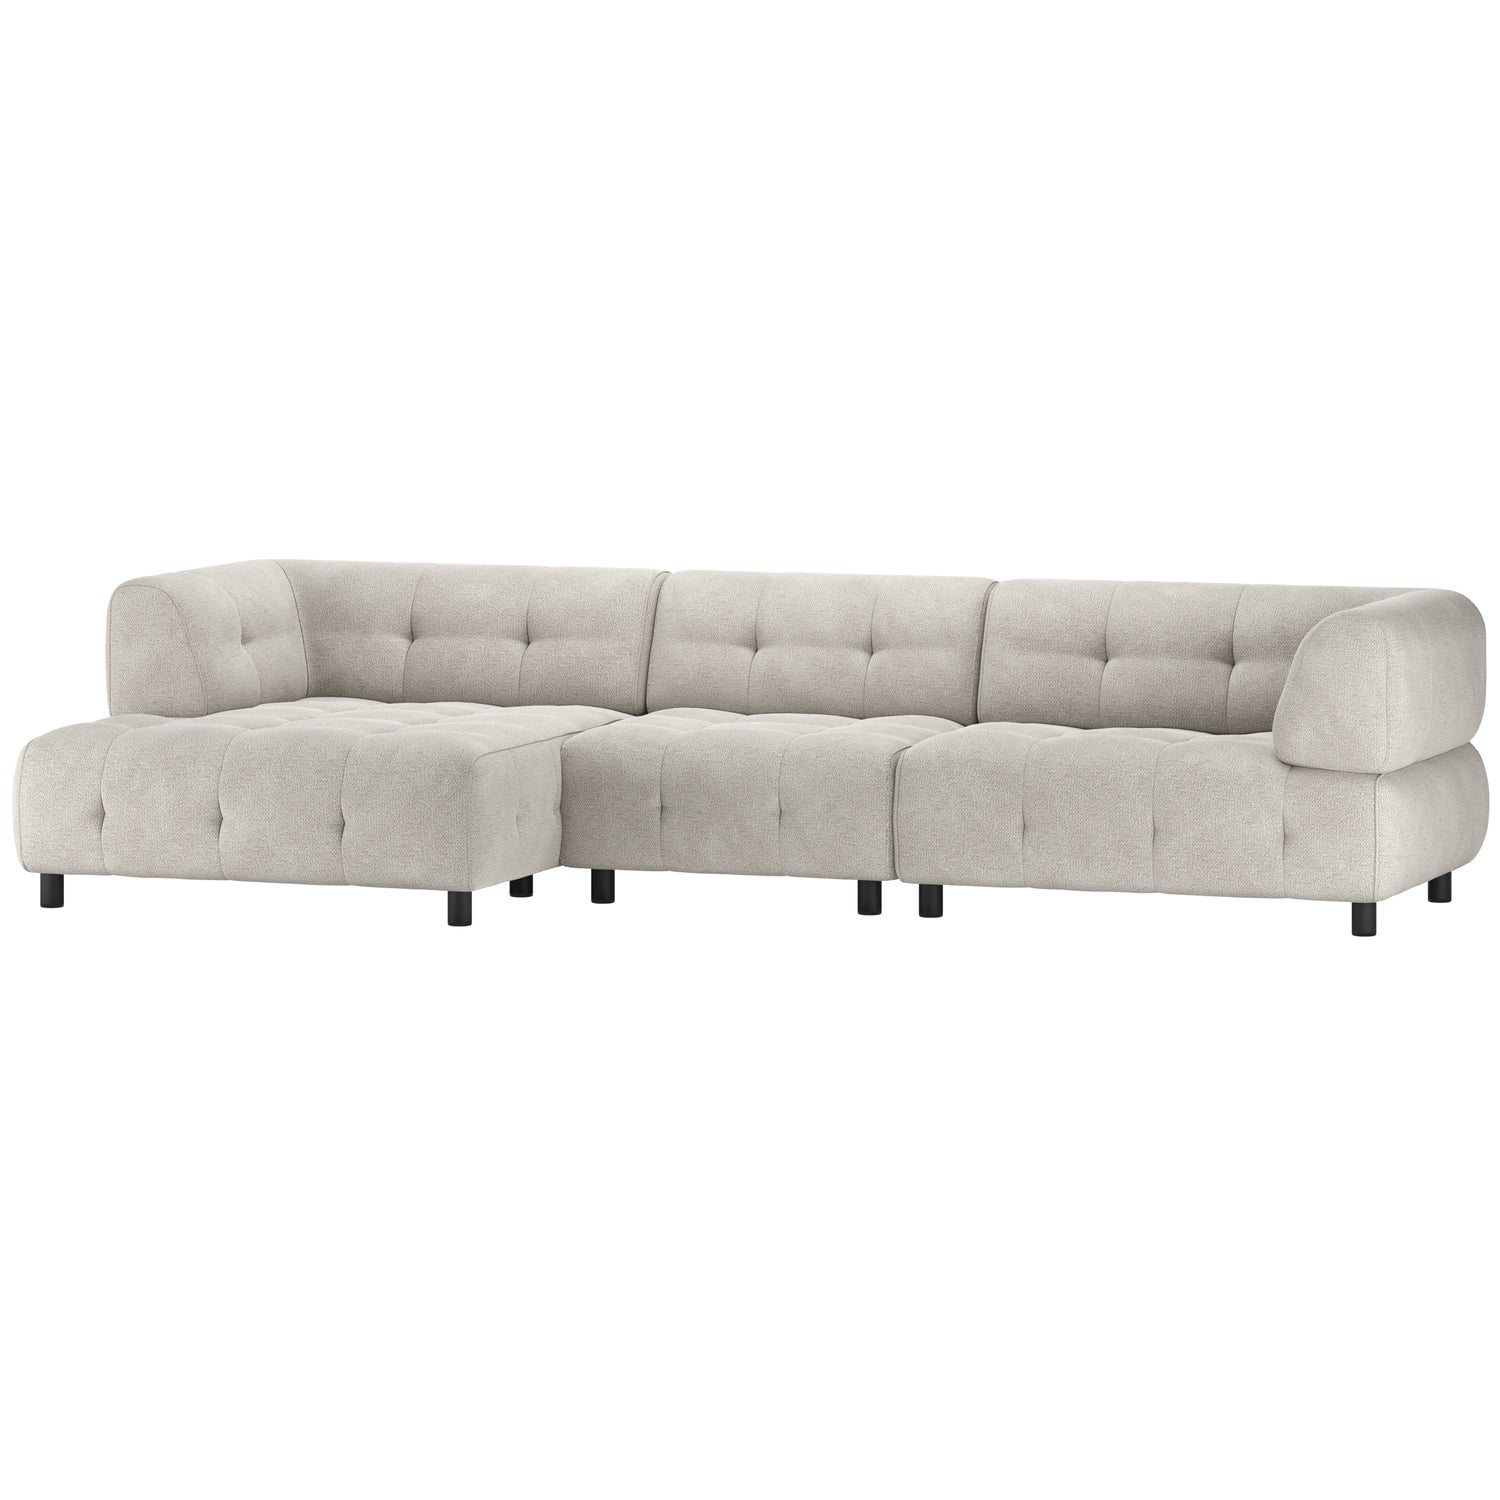 374132-CP-01_VS_WE_Louis_chaise_longue_links_chenille_powder_SA.jpg?auto=webp&format=png&width=1500&height=1500